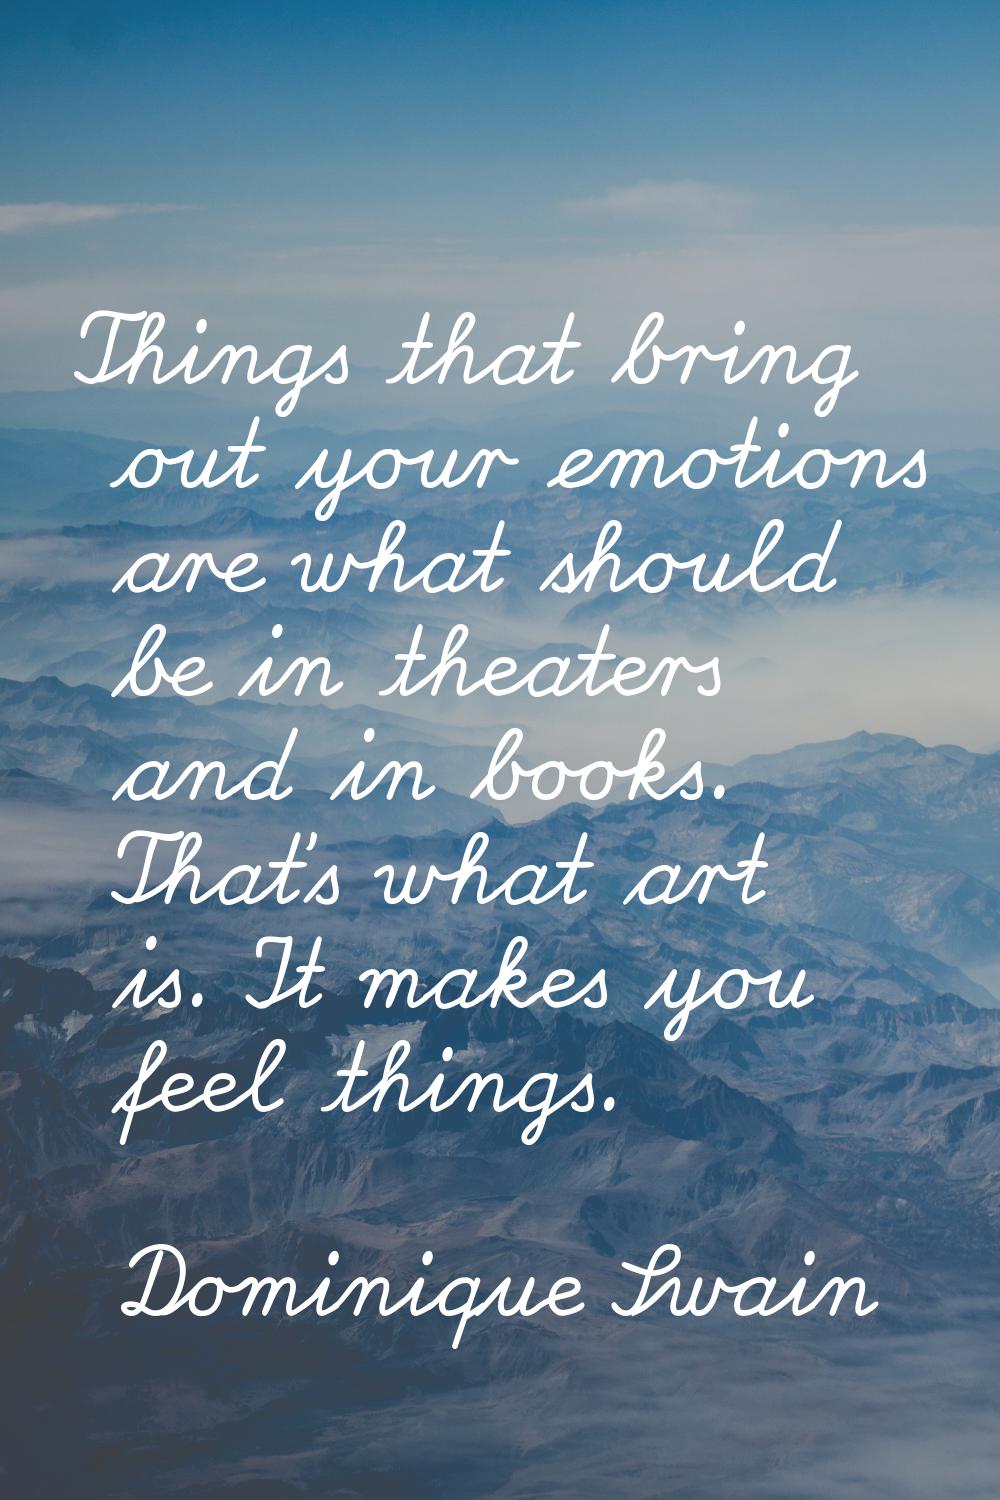 Things that bring out your emotions are what should be in theaters and in books. That's what art is